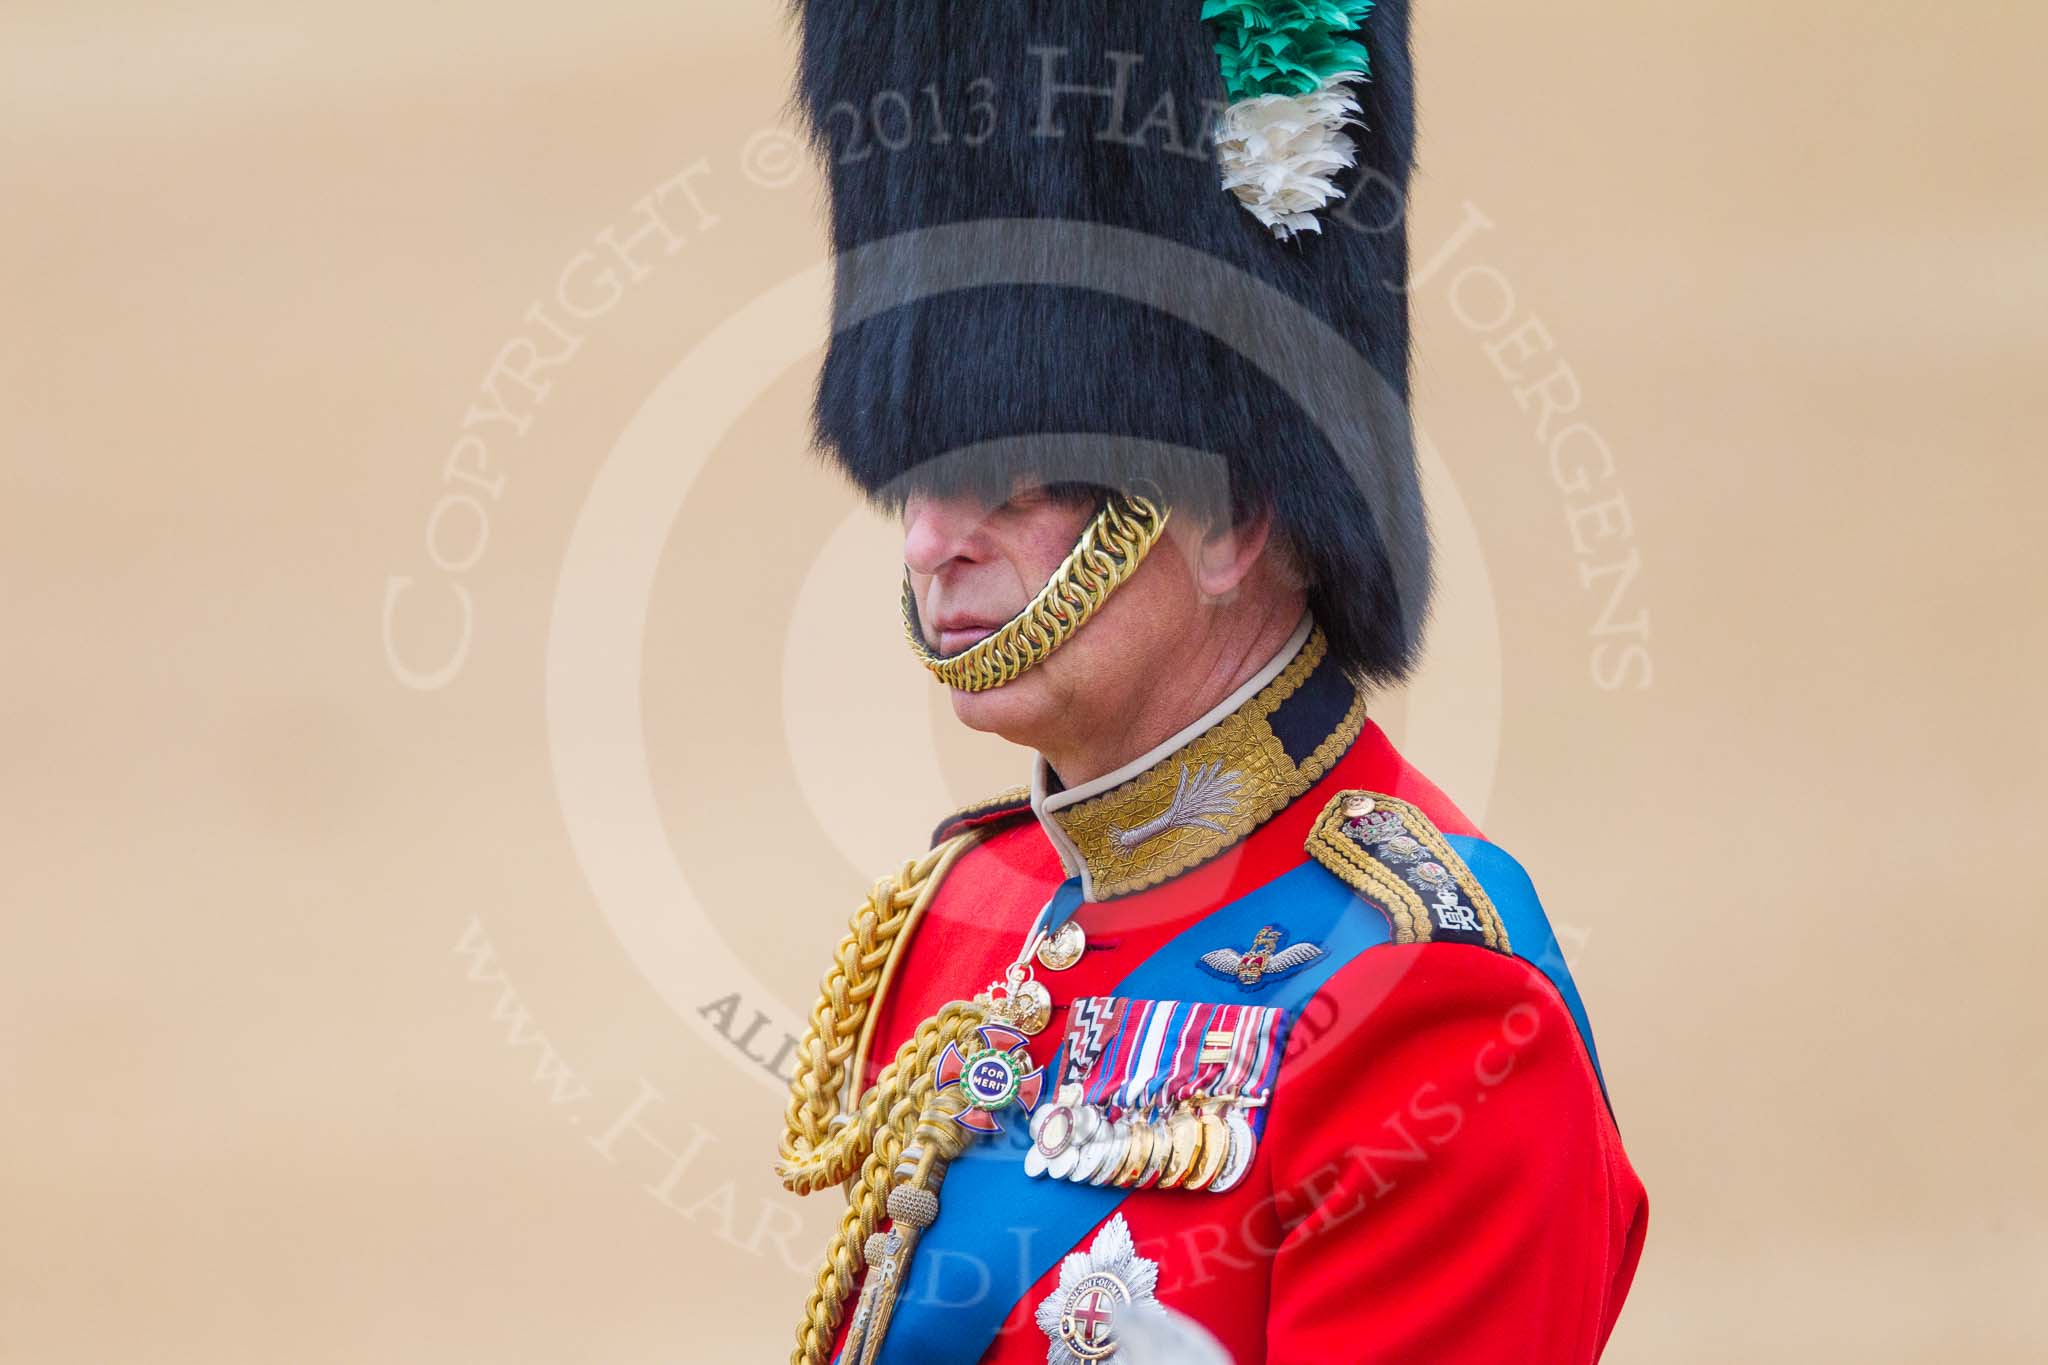 Trooping the Colour 2015. Image #263, 13 June 2015 11:00 Horse Guards Parade, London, UK